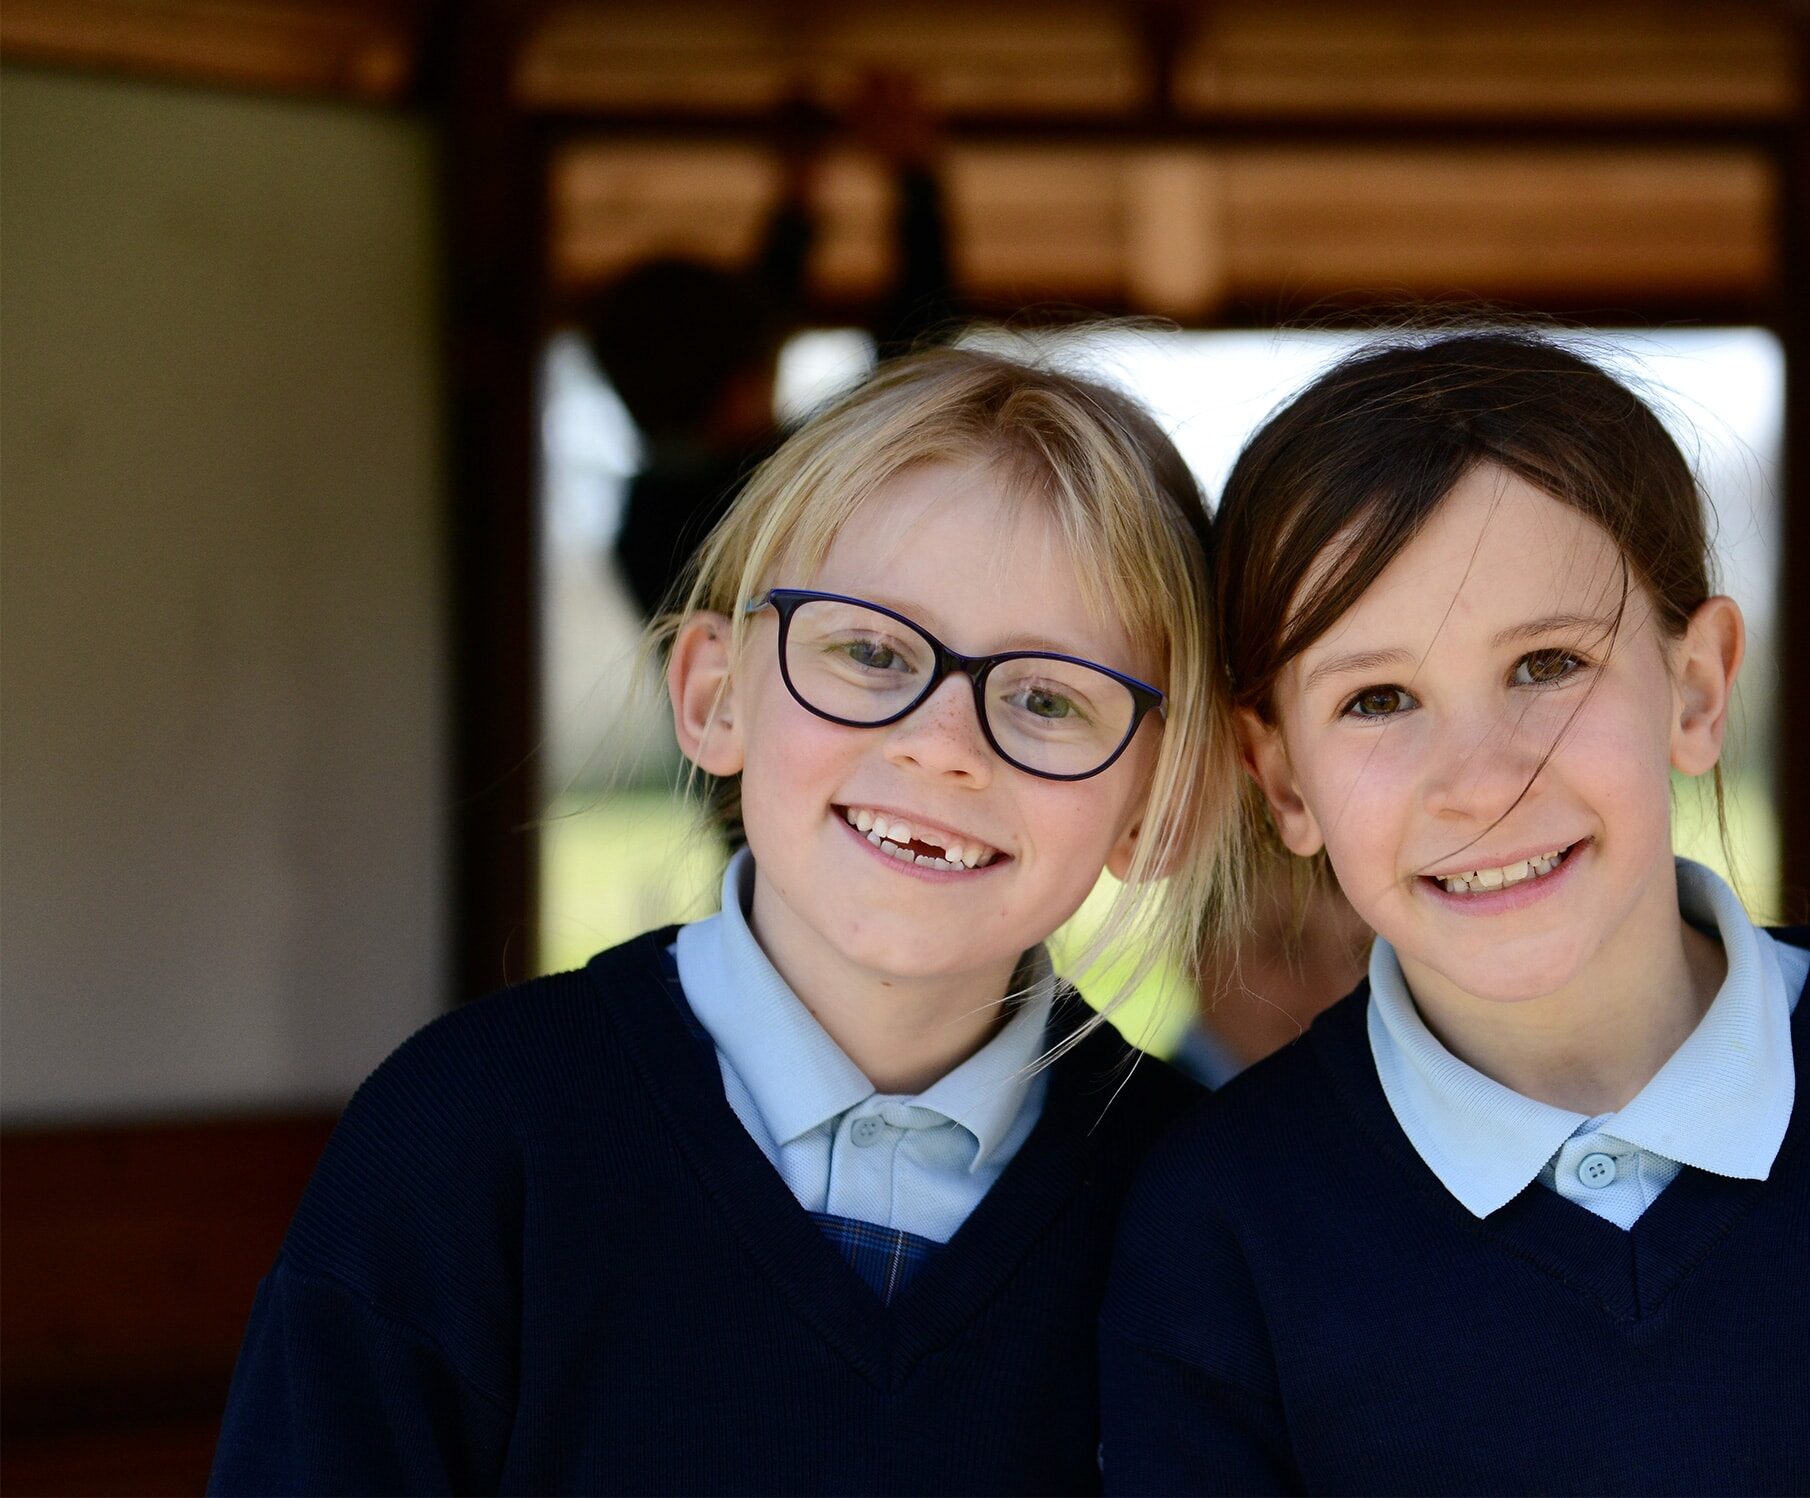 Two Lower Prep pupils smiling